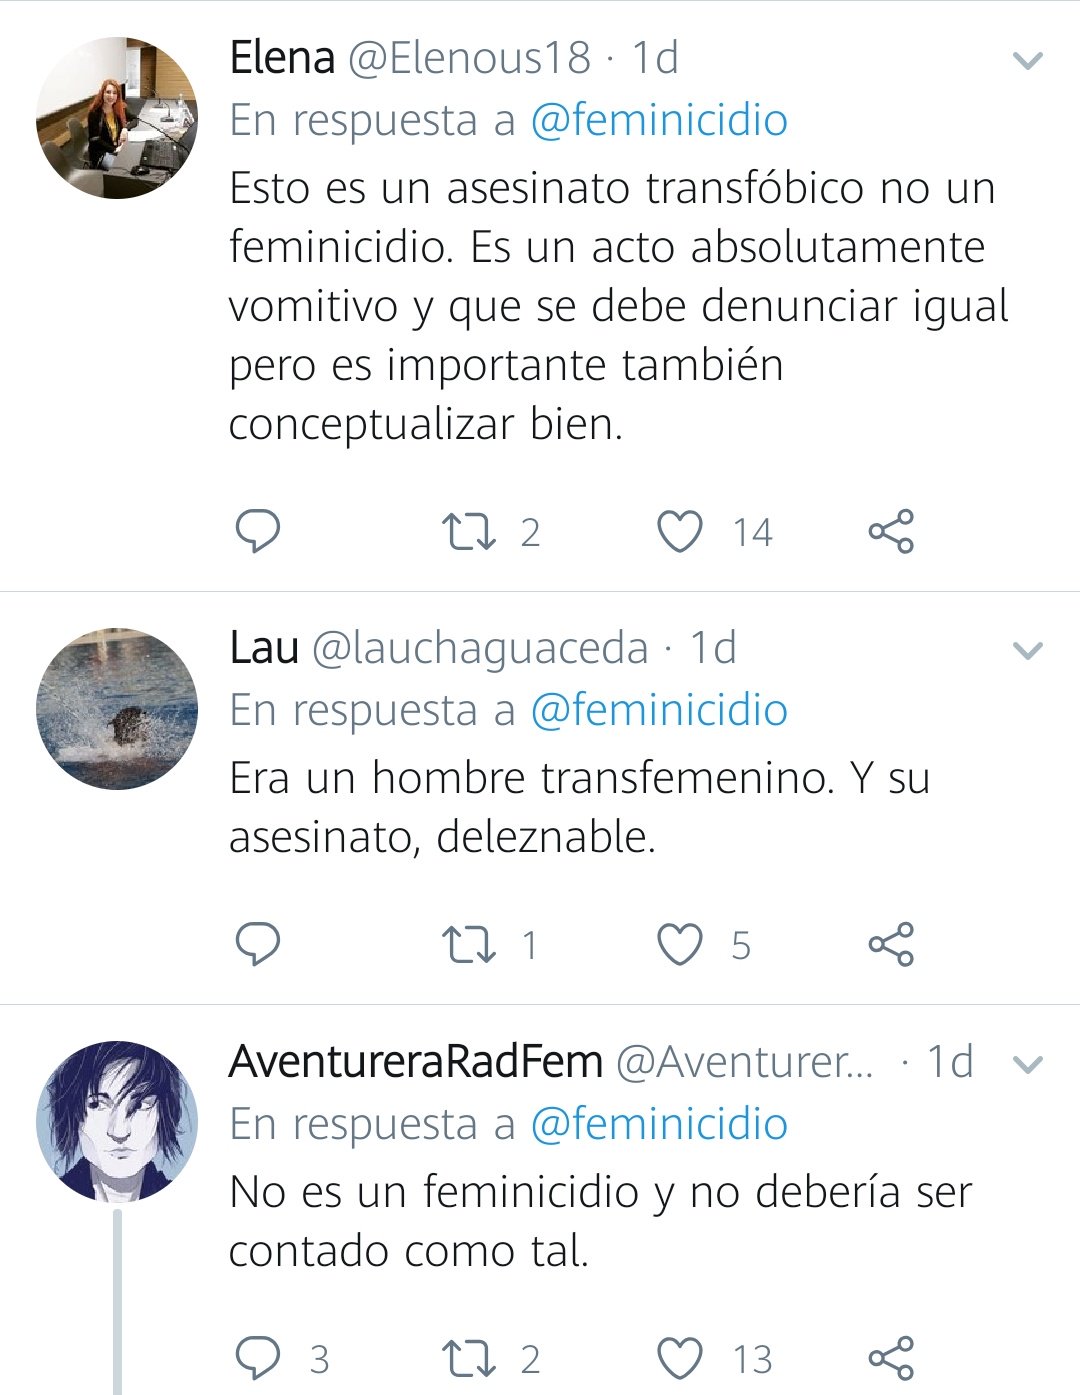 Twitter es oscuro y alberga horrores